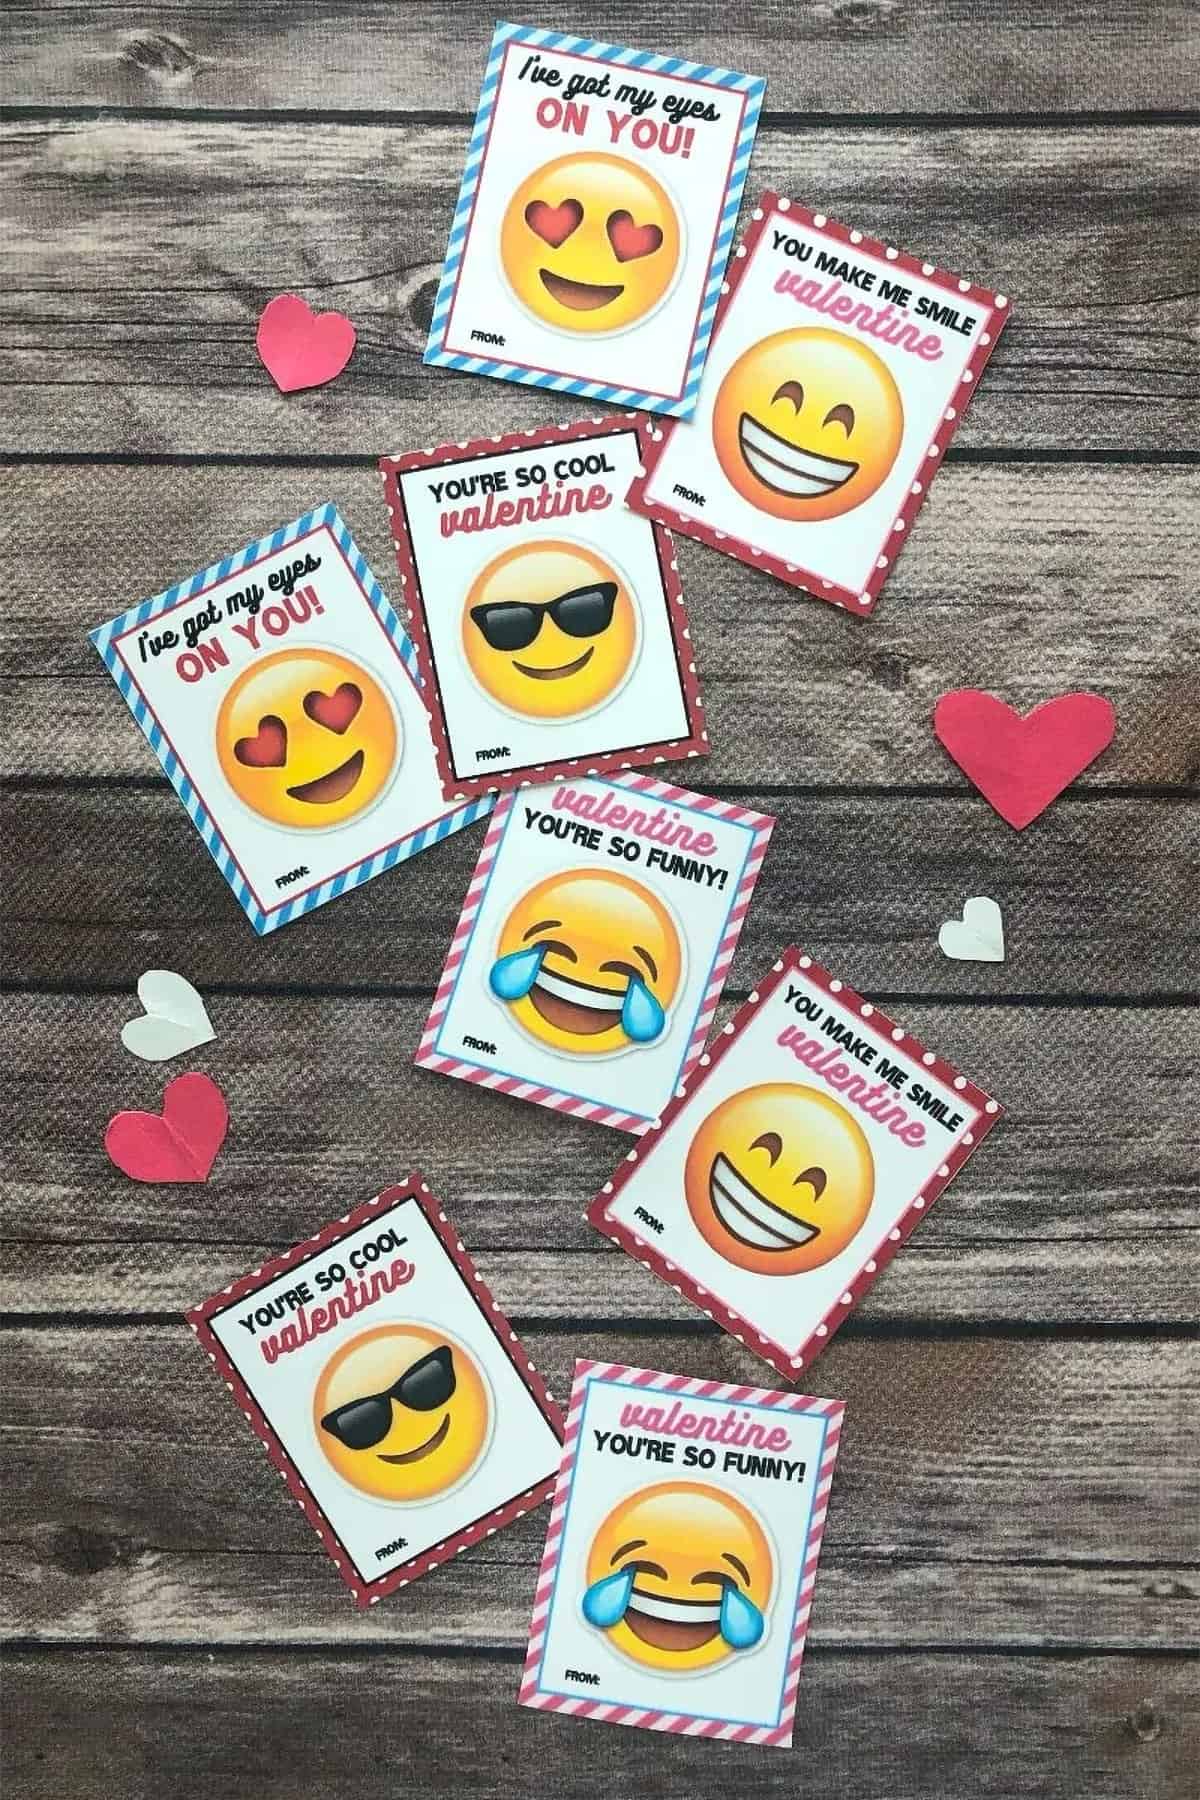 Several emojis Valentine's Day cards scattered about with you are so cool written on them.